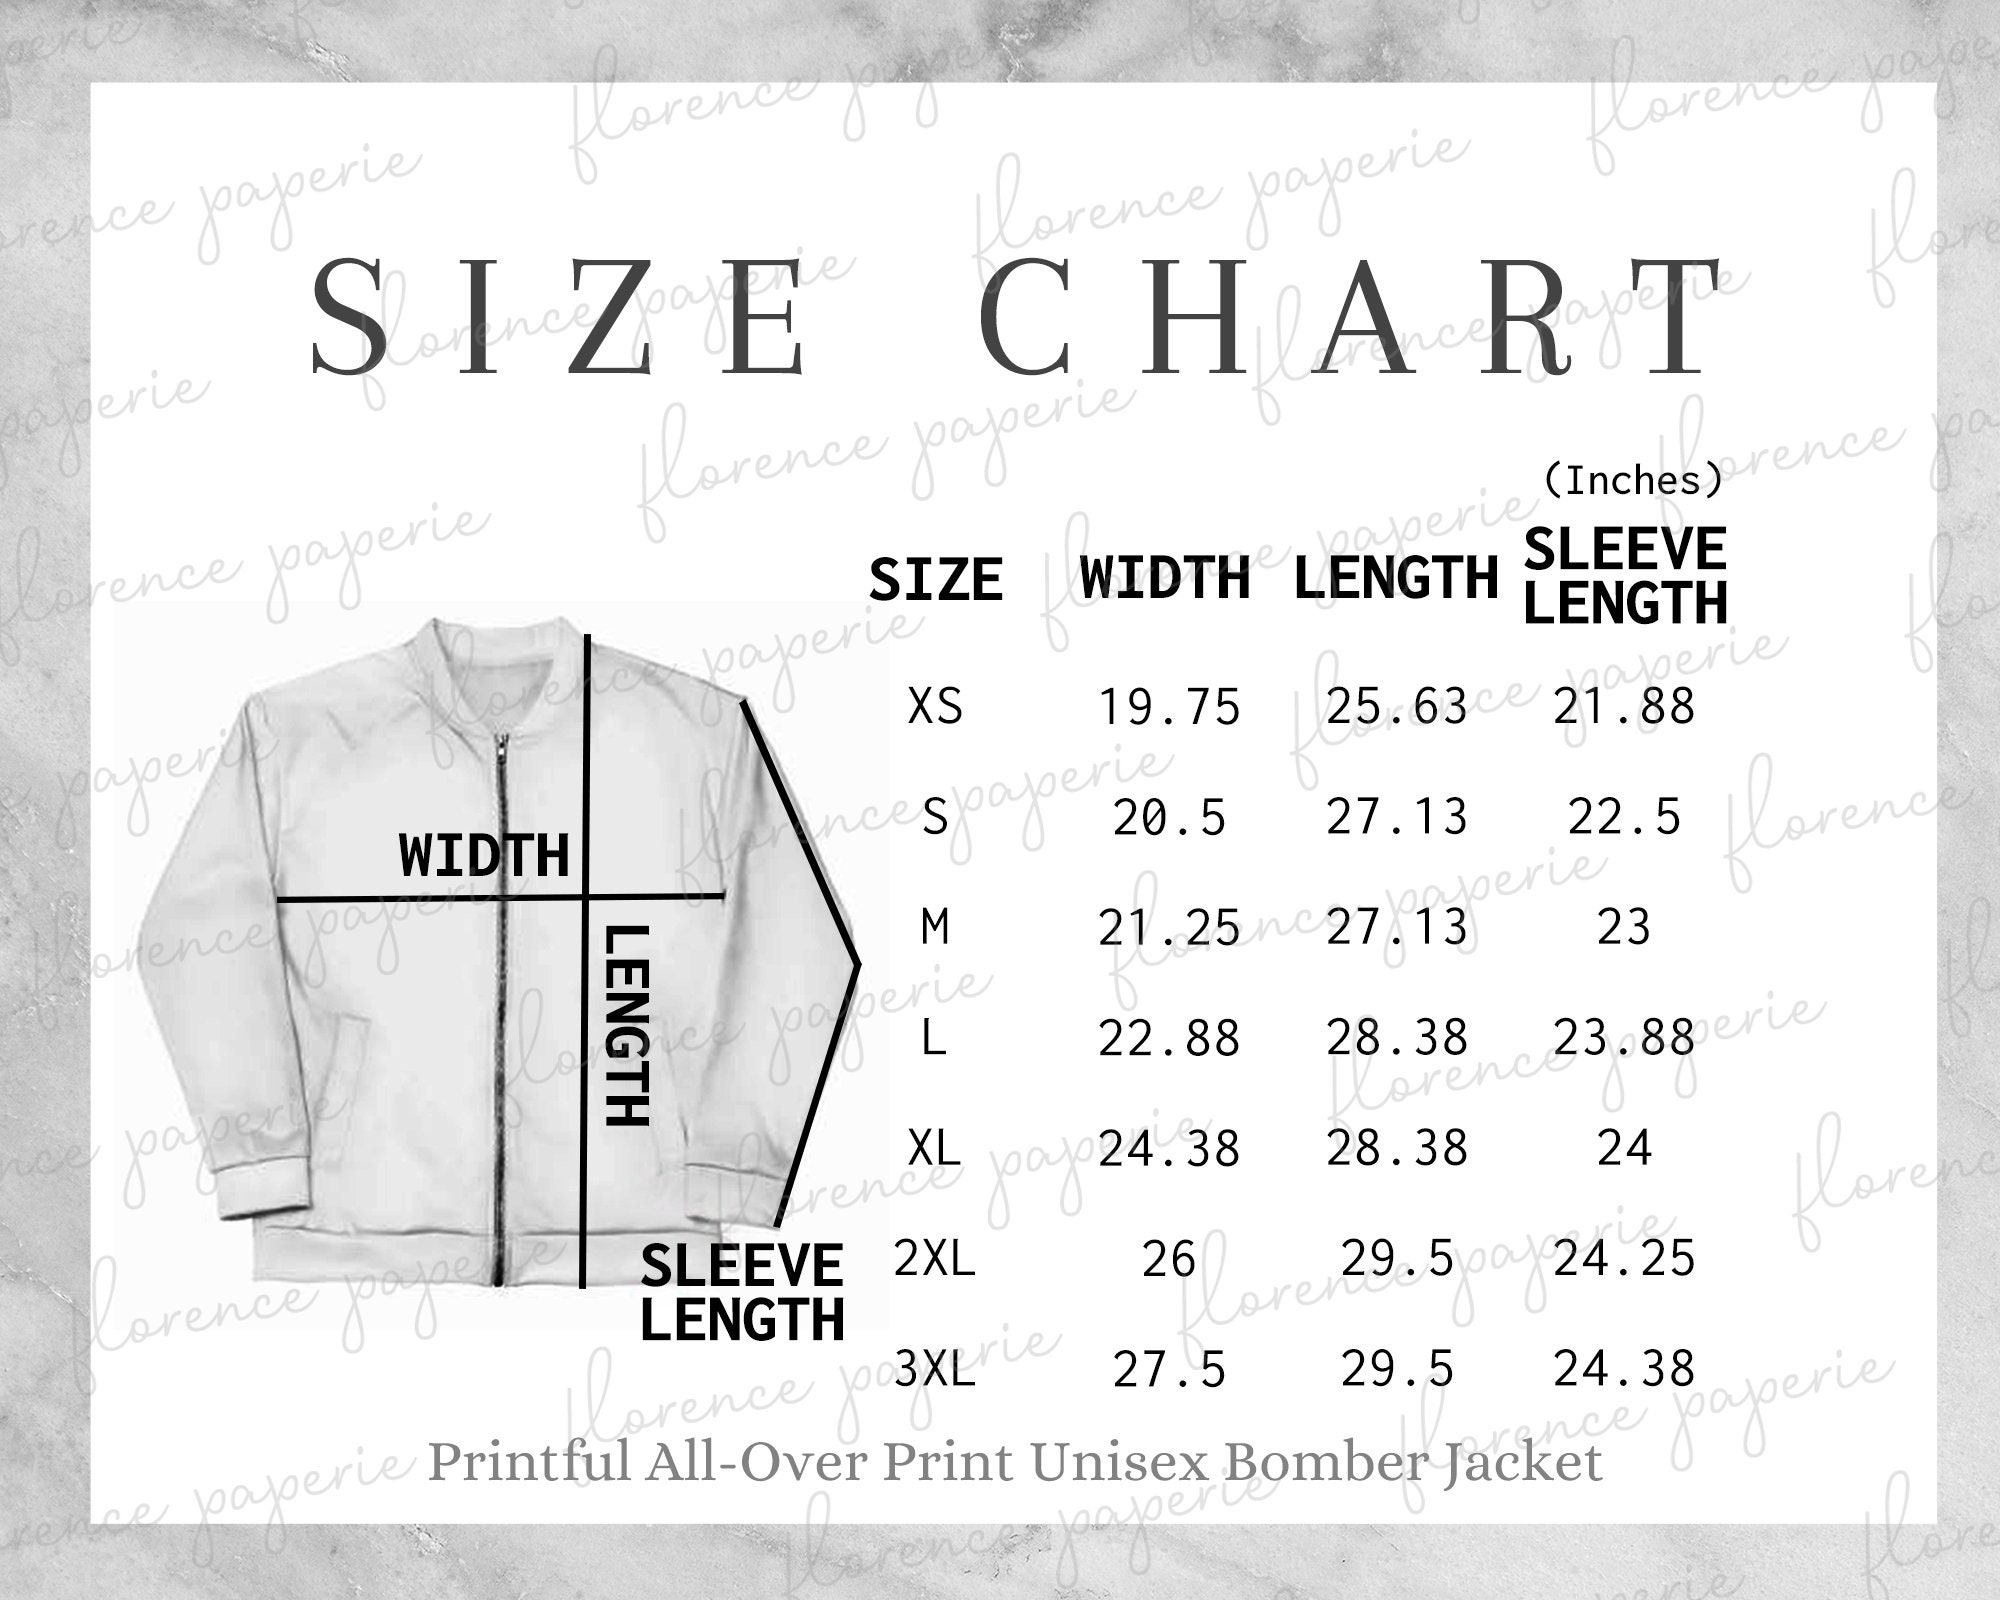 Printful All-Over Print Unisex Bomber Jacket Size Chart, Downloadable,  Printable, Mens Size Chart, Womens Size Chart for Printful